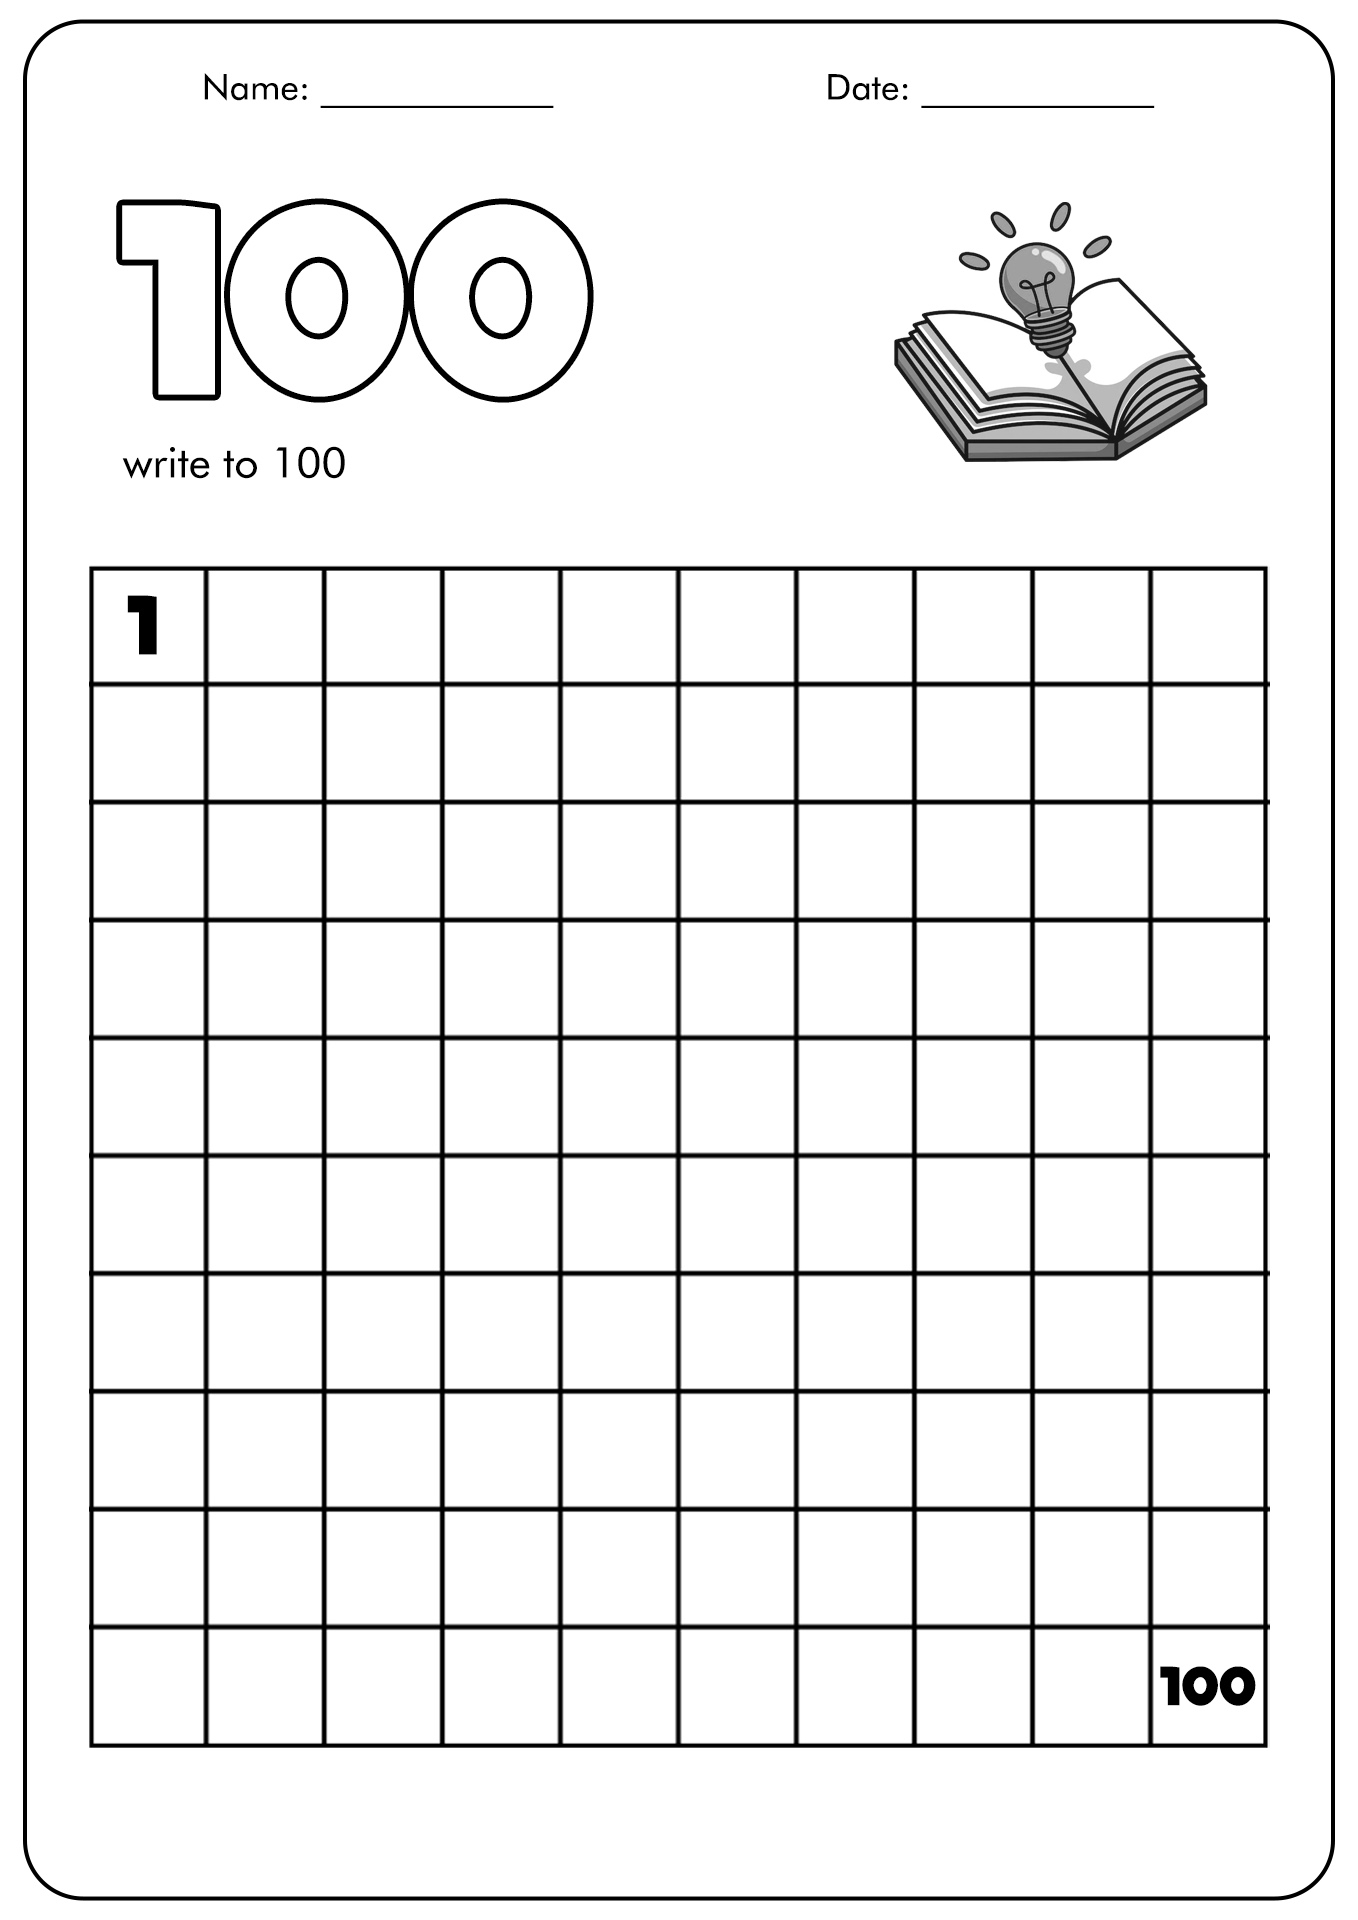 Blank Counting to 100 Worksheet Image